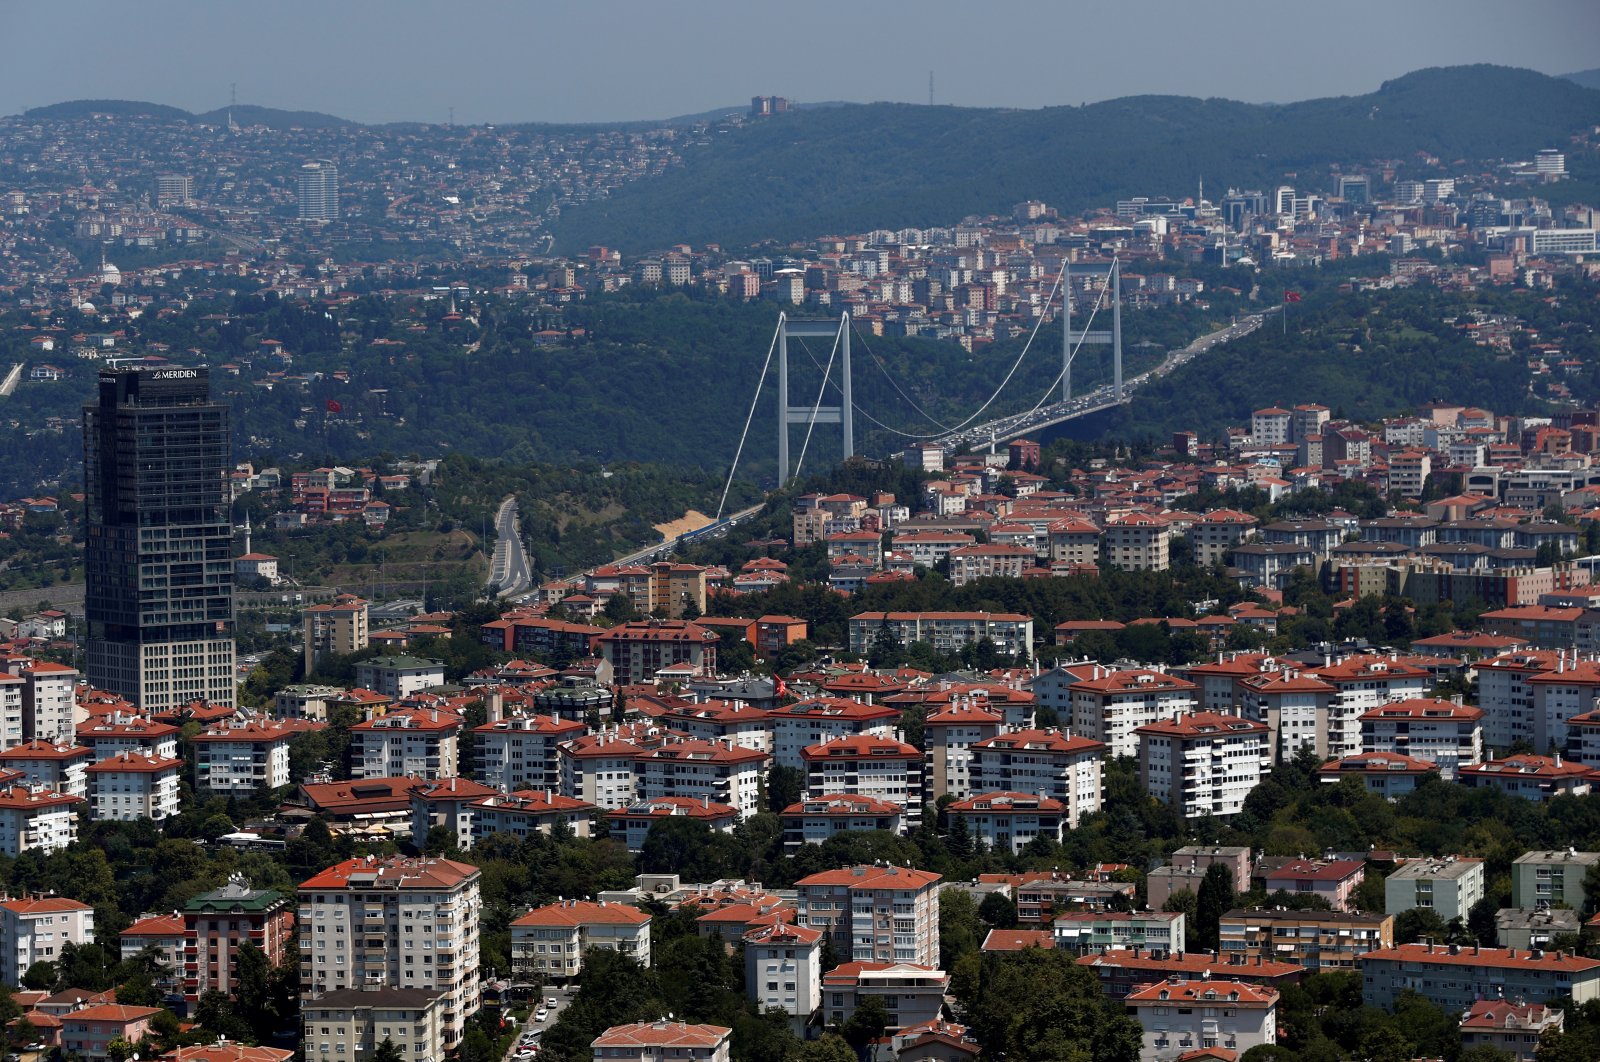 The Fatih Sultan Mehmet Bridge linking the city's European and Asian side over the Bosporus rises behind residential apartment blocks in Istanbul, Turkey, Aug. 1, 2019. (Reuters Photo)